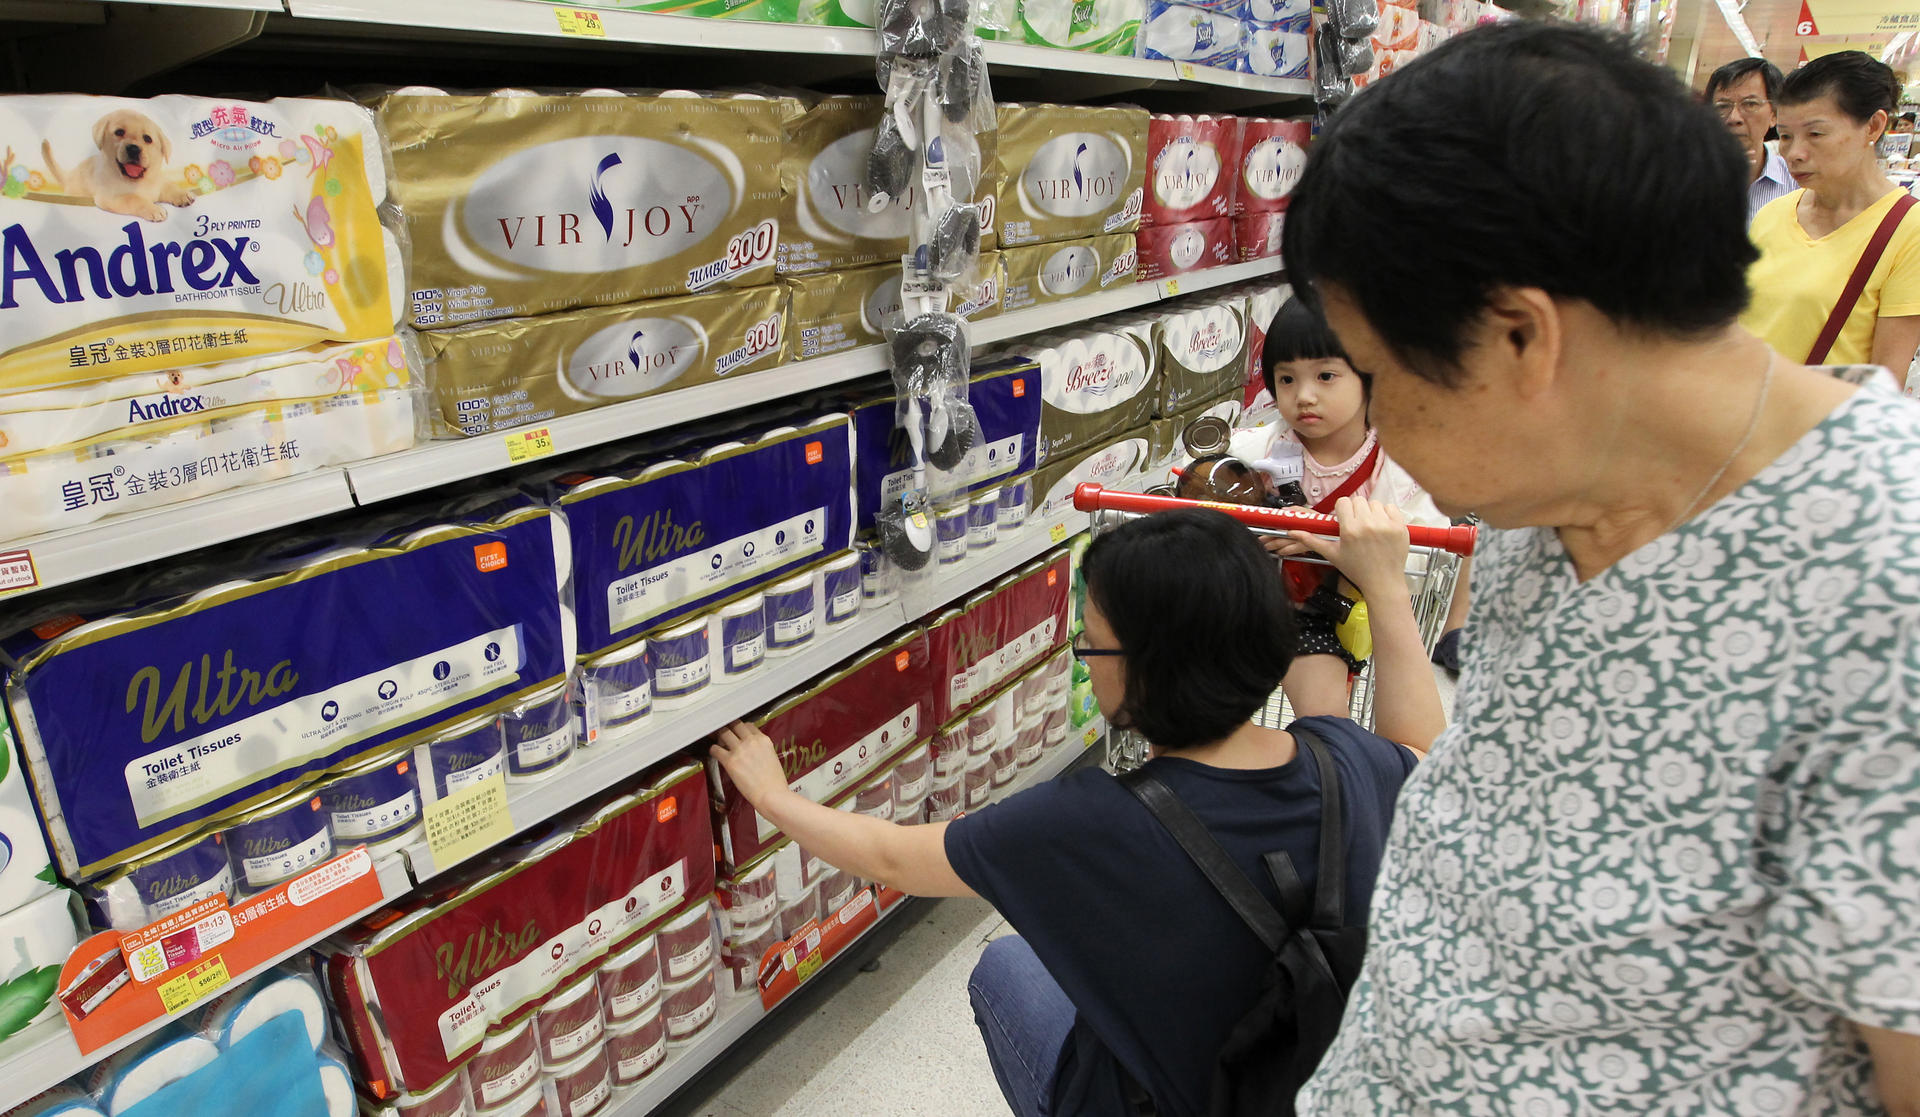 Toilet paper comes under high-dividend stocks. Photo: Edward Wong